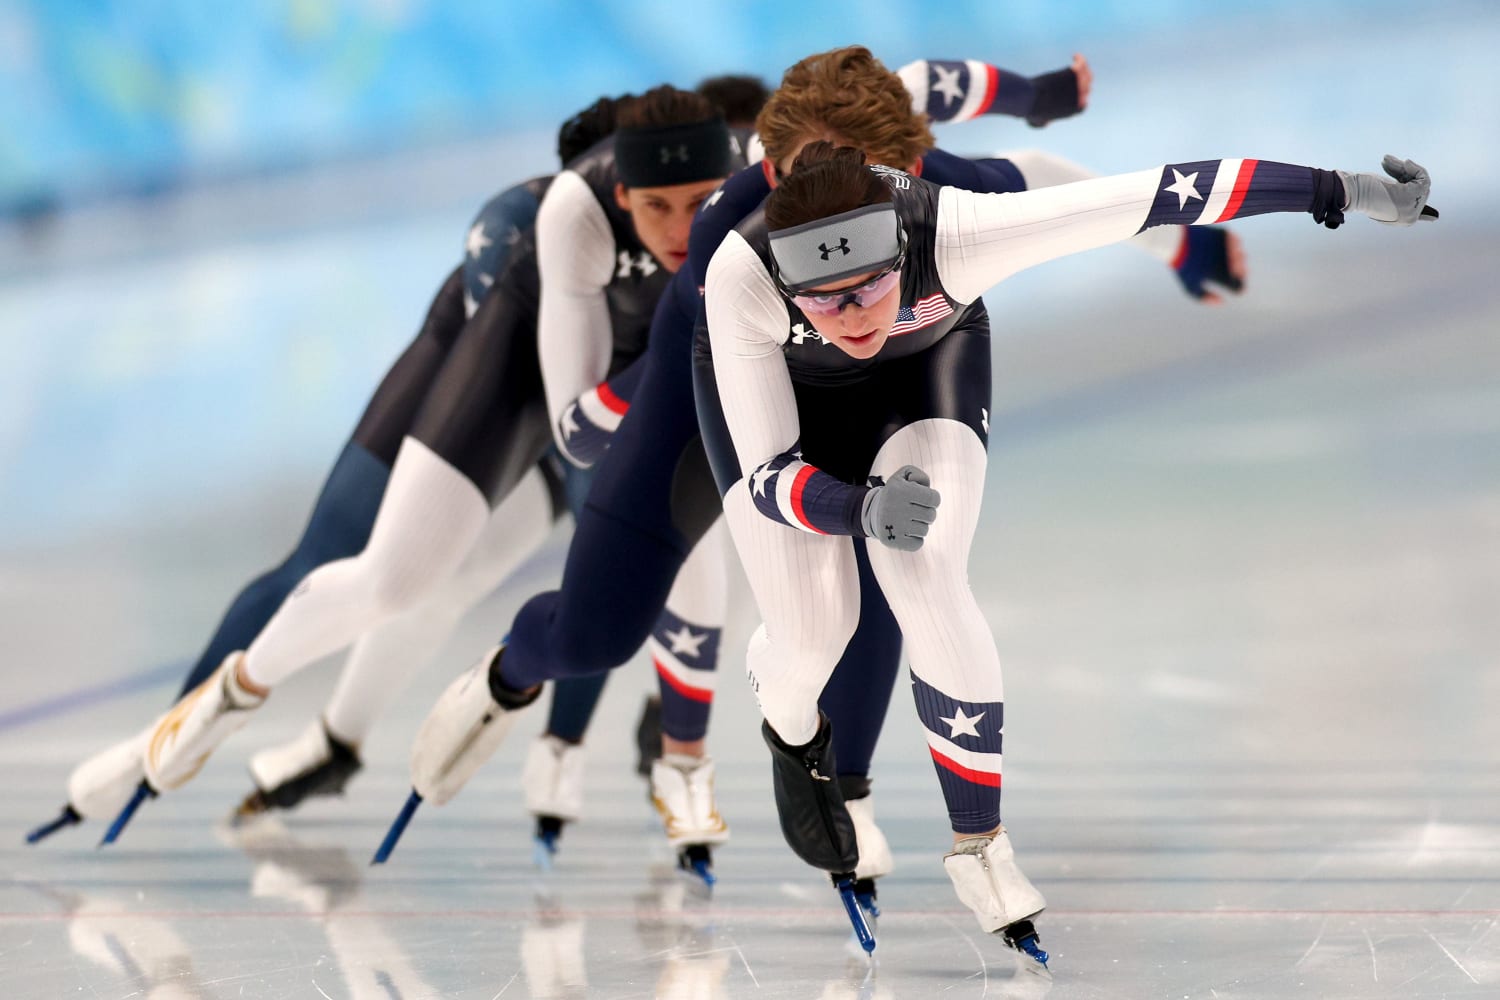 Speedskating will look slightly different at the Olympics this year